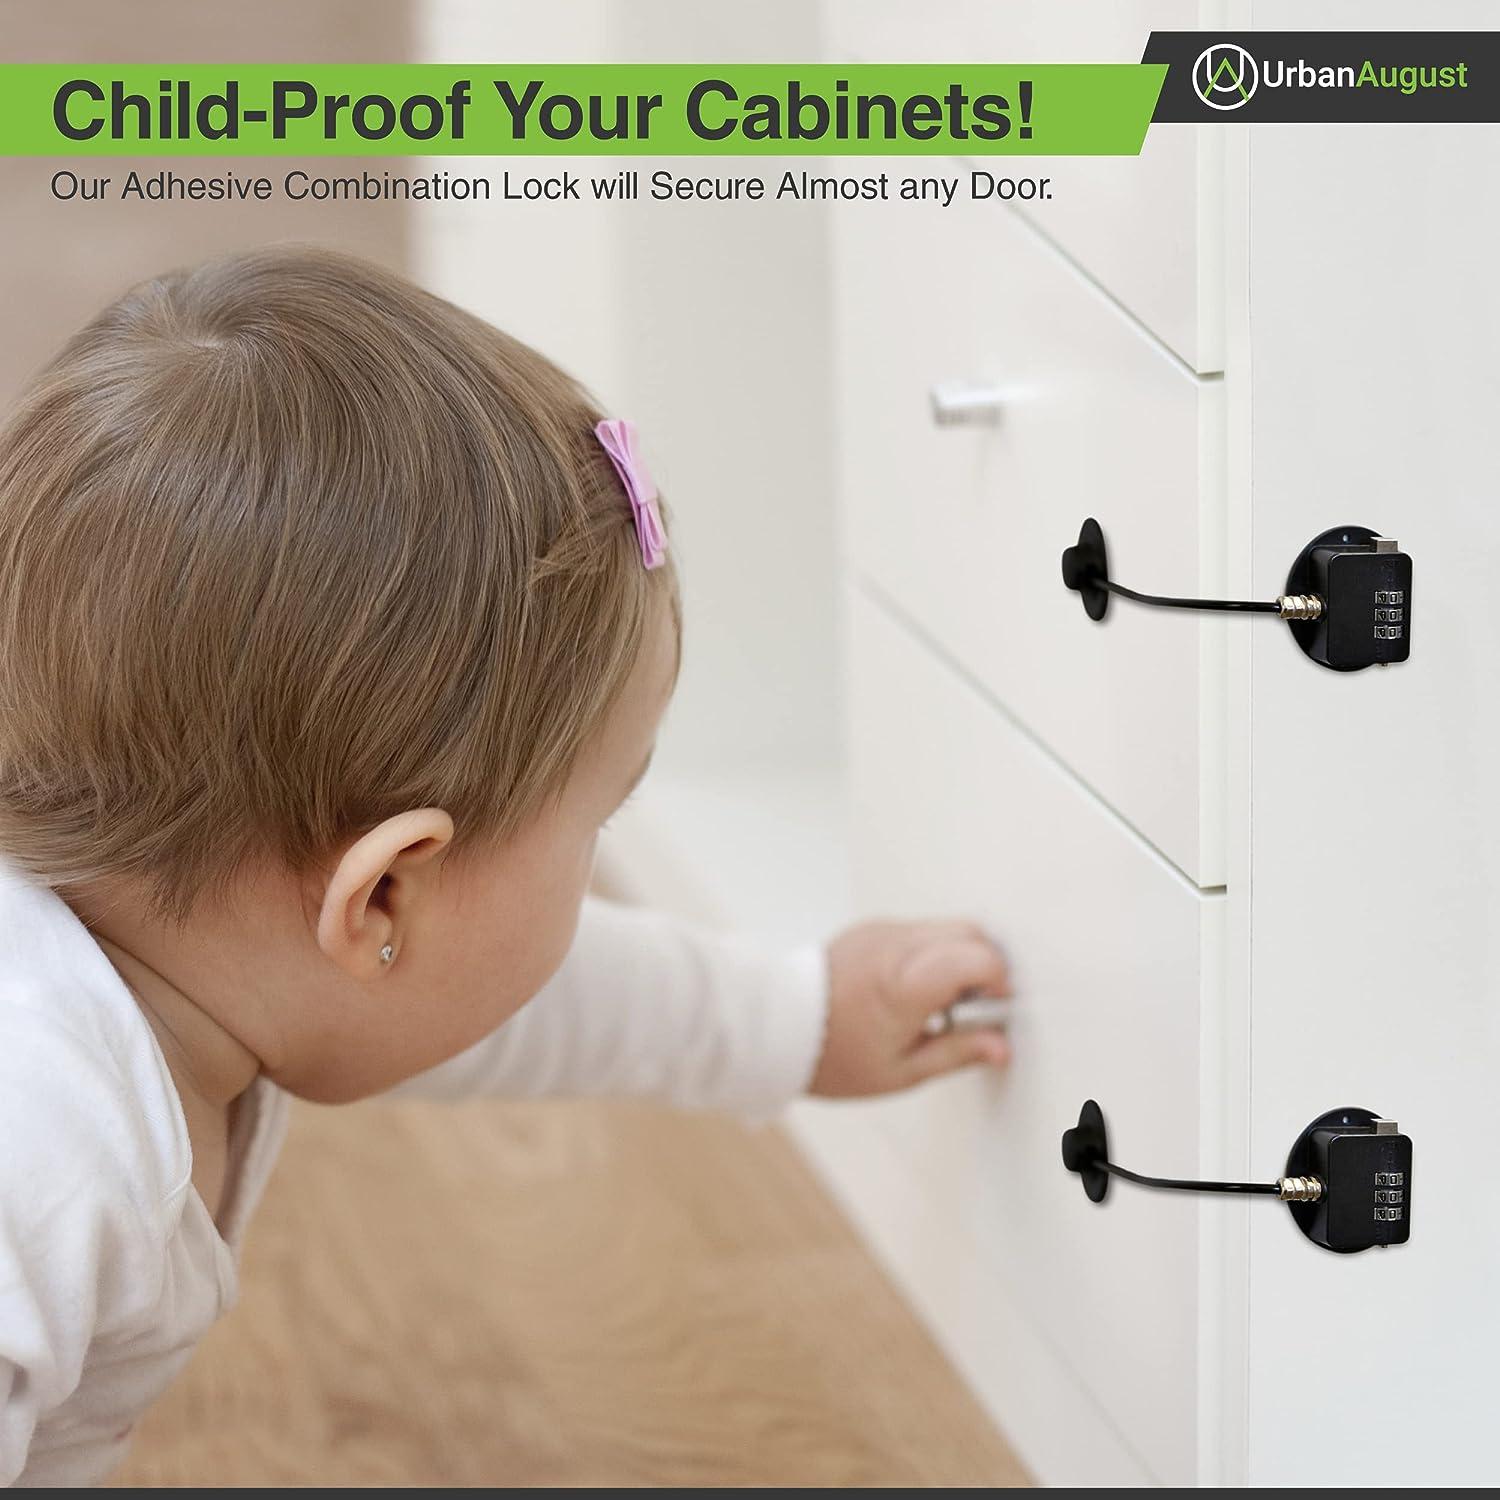 The Best Cabinet Locks for Child Safety That You Can Buy on